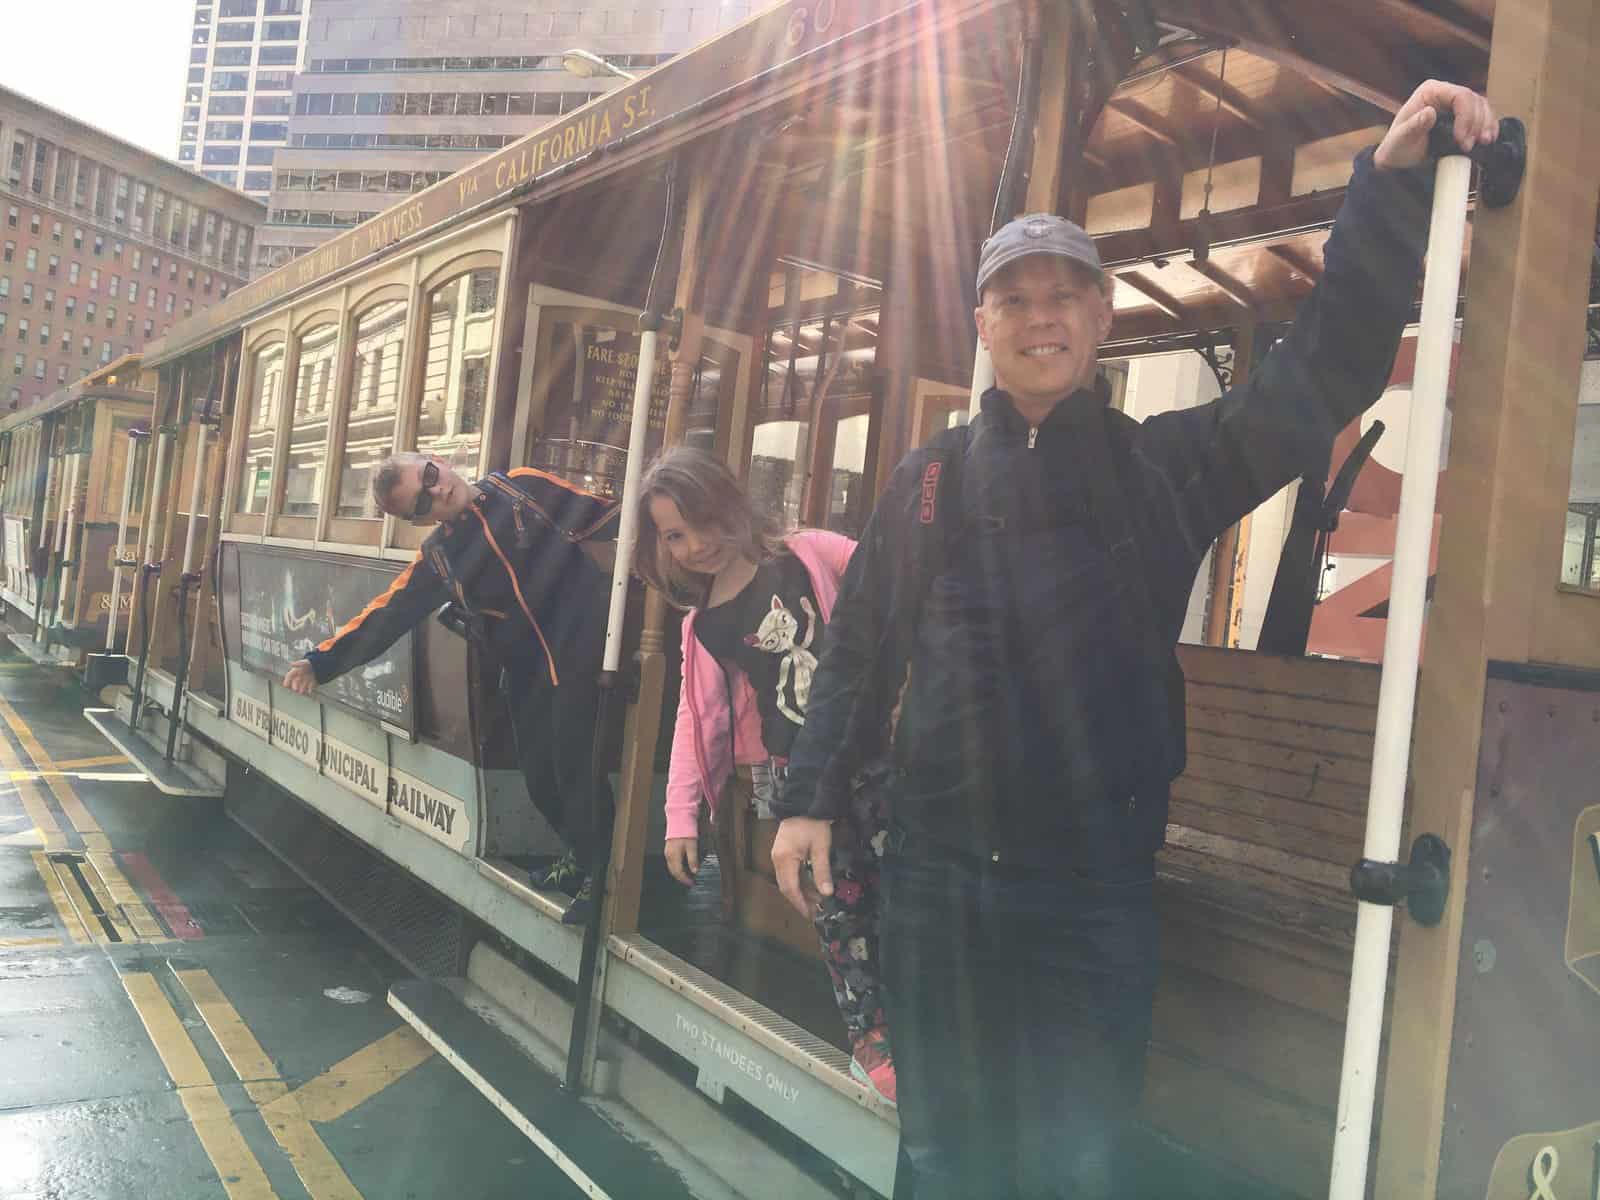 Dave, CJ & Miss E hanging off the side of a trolley car